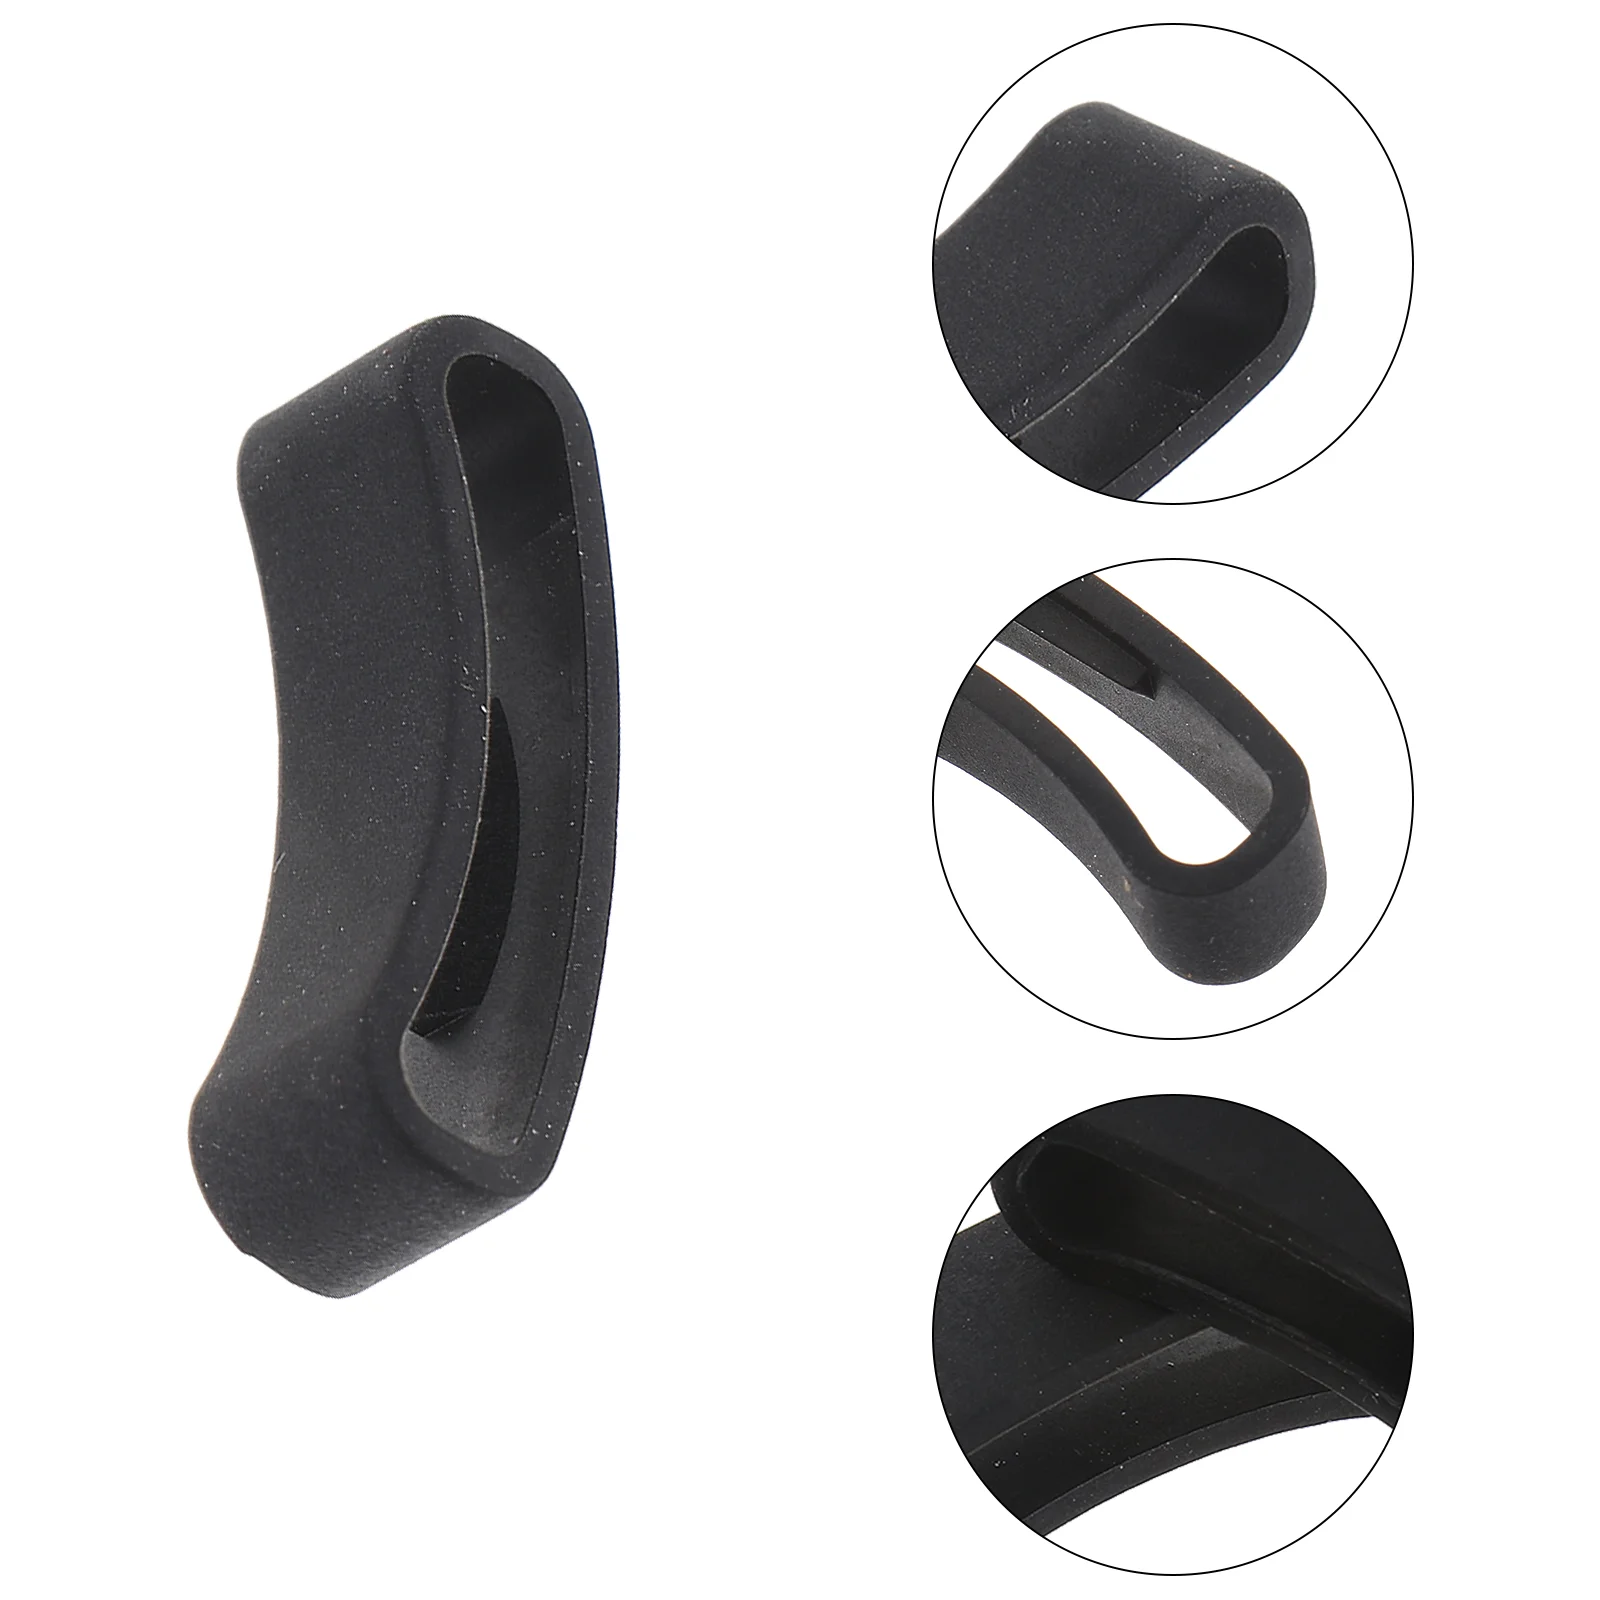 

Watch Ringband Replacement Strap Holder Silicone Fastener Ringsbuckle Keeper Bracelet Fall Antirubber Straps